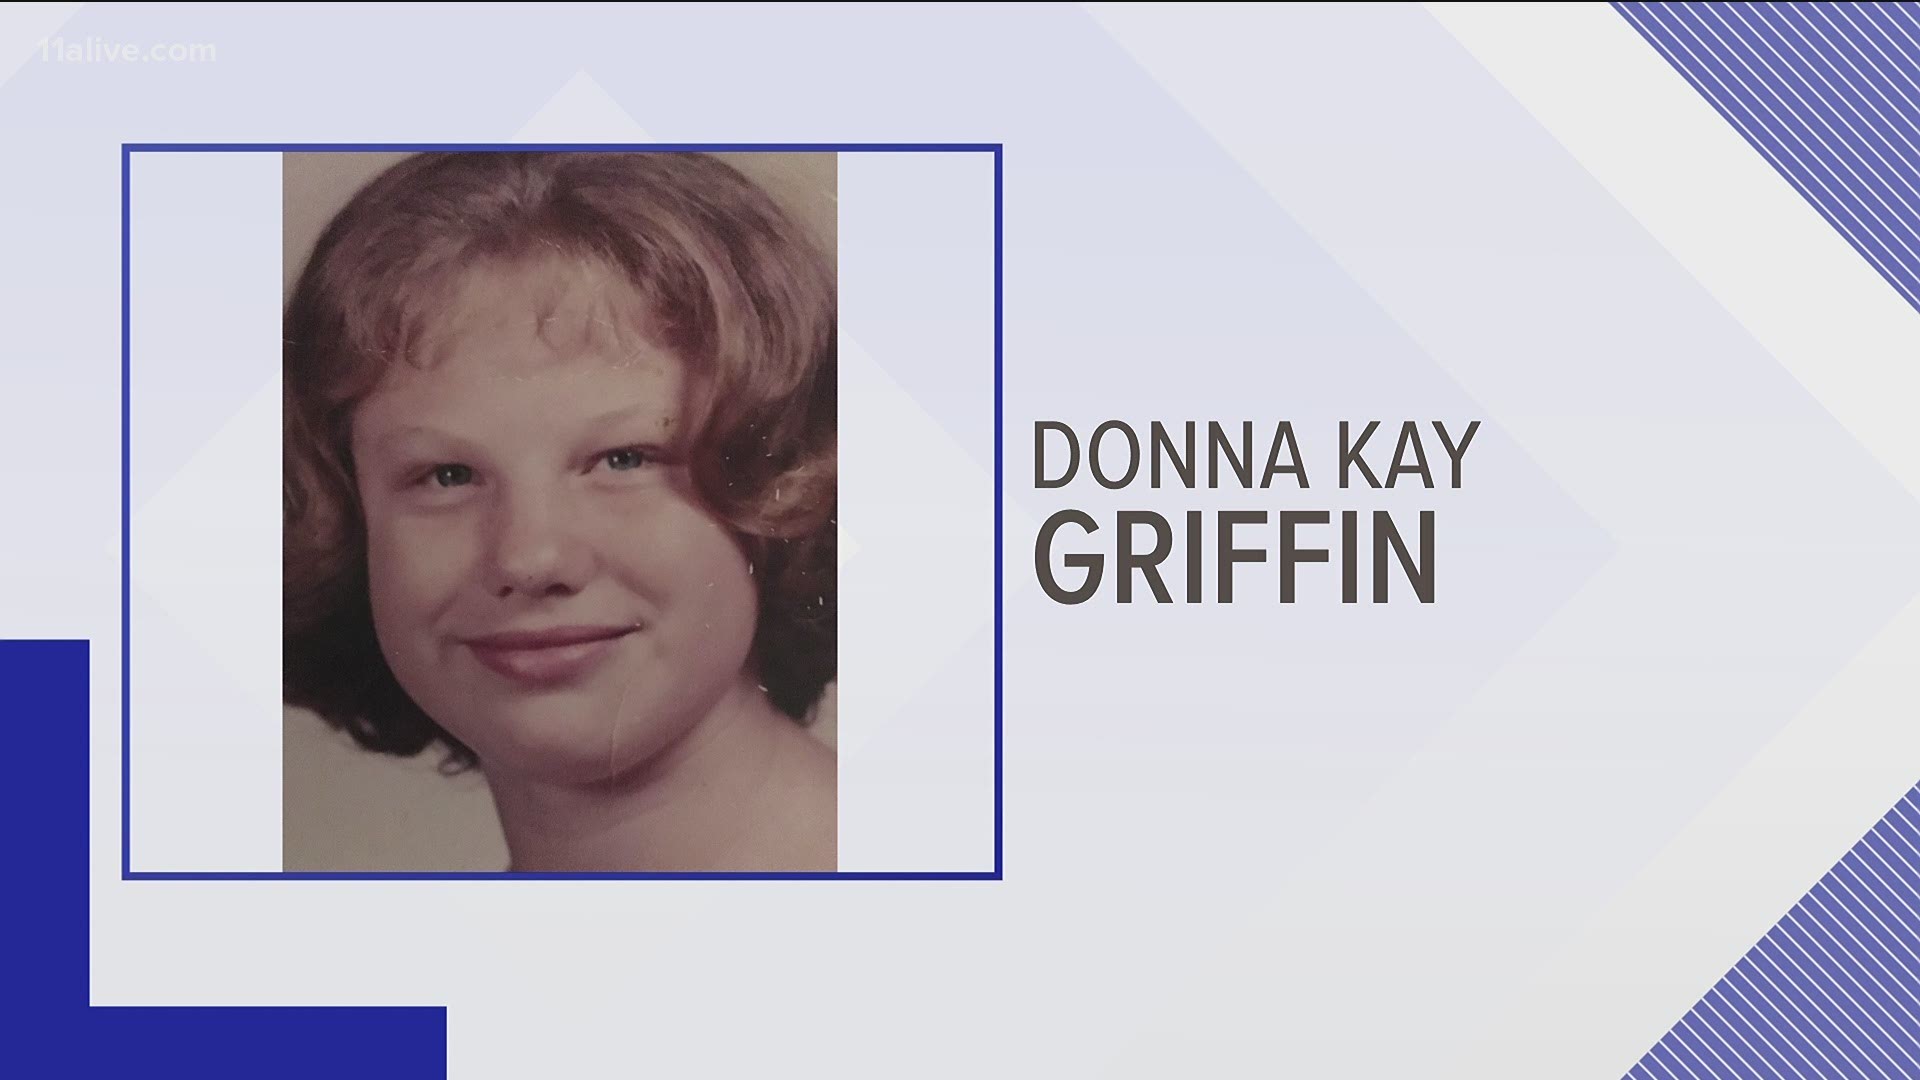 Donna Kay Griffin was from Dalton, Georgia but moved to Pennsylvania in the 70s, state police said.